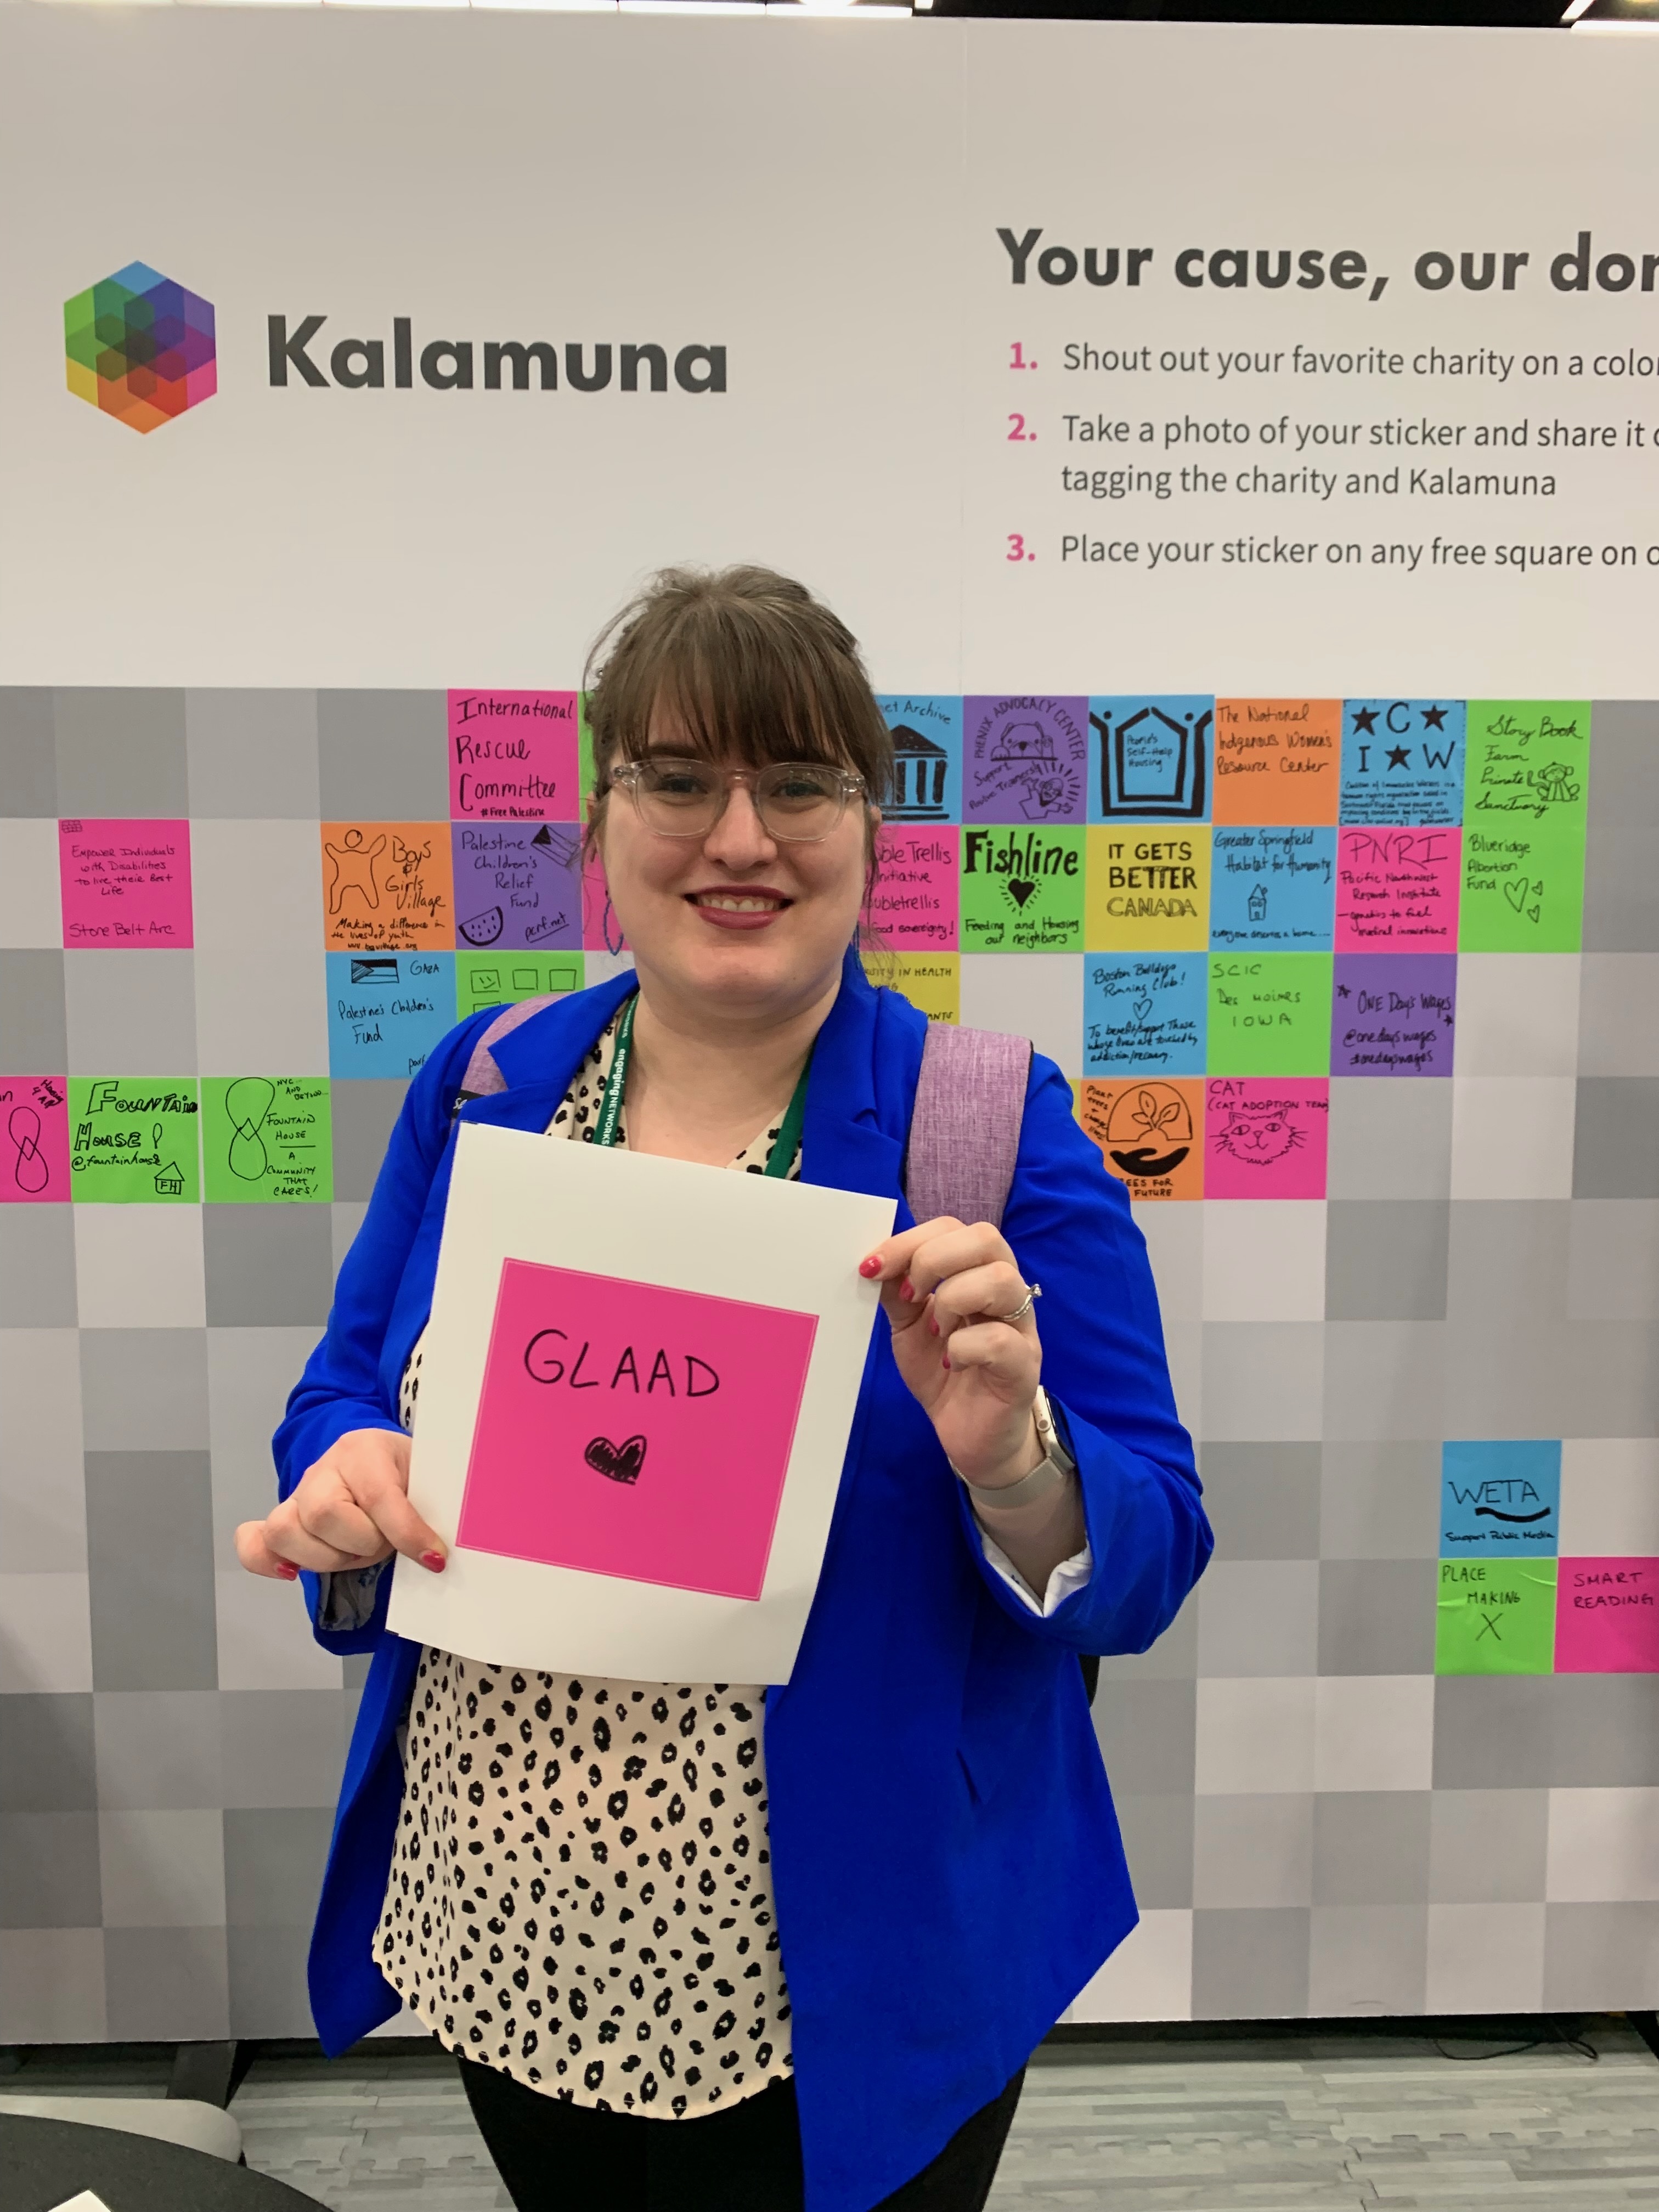 Emily Harden, a white women with clear glasses and straight across bangs, wearing a bright dark blue blazer and pattern shirt, holding a sign that says 'GLAAD' with a heart